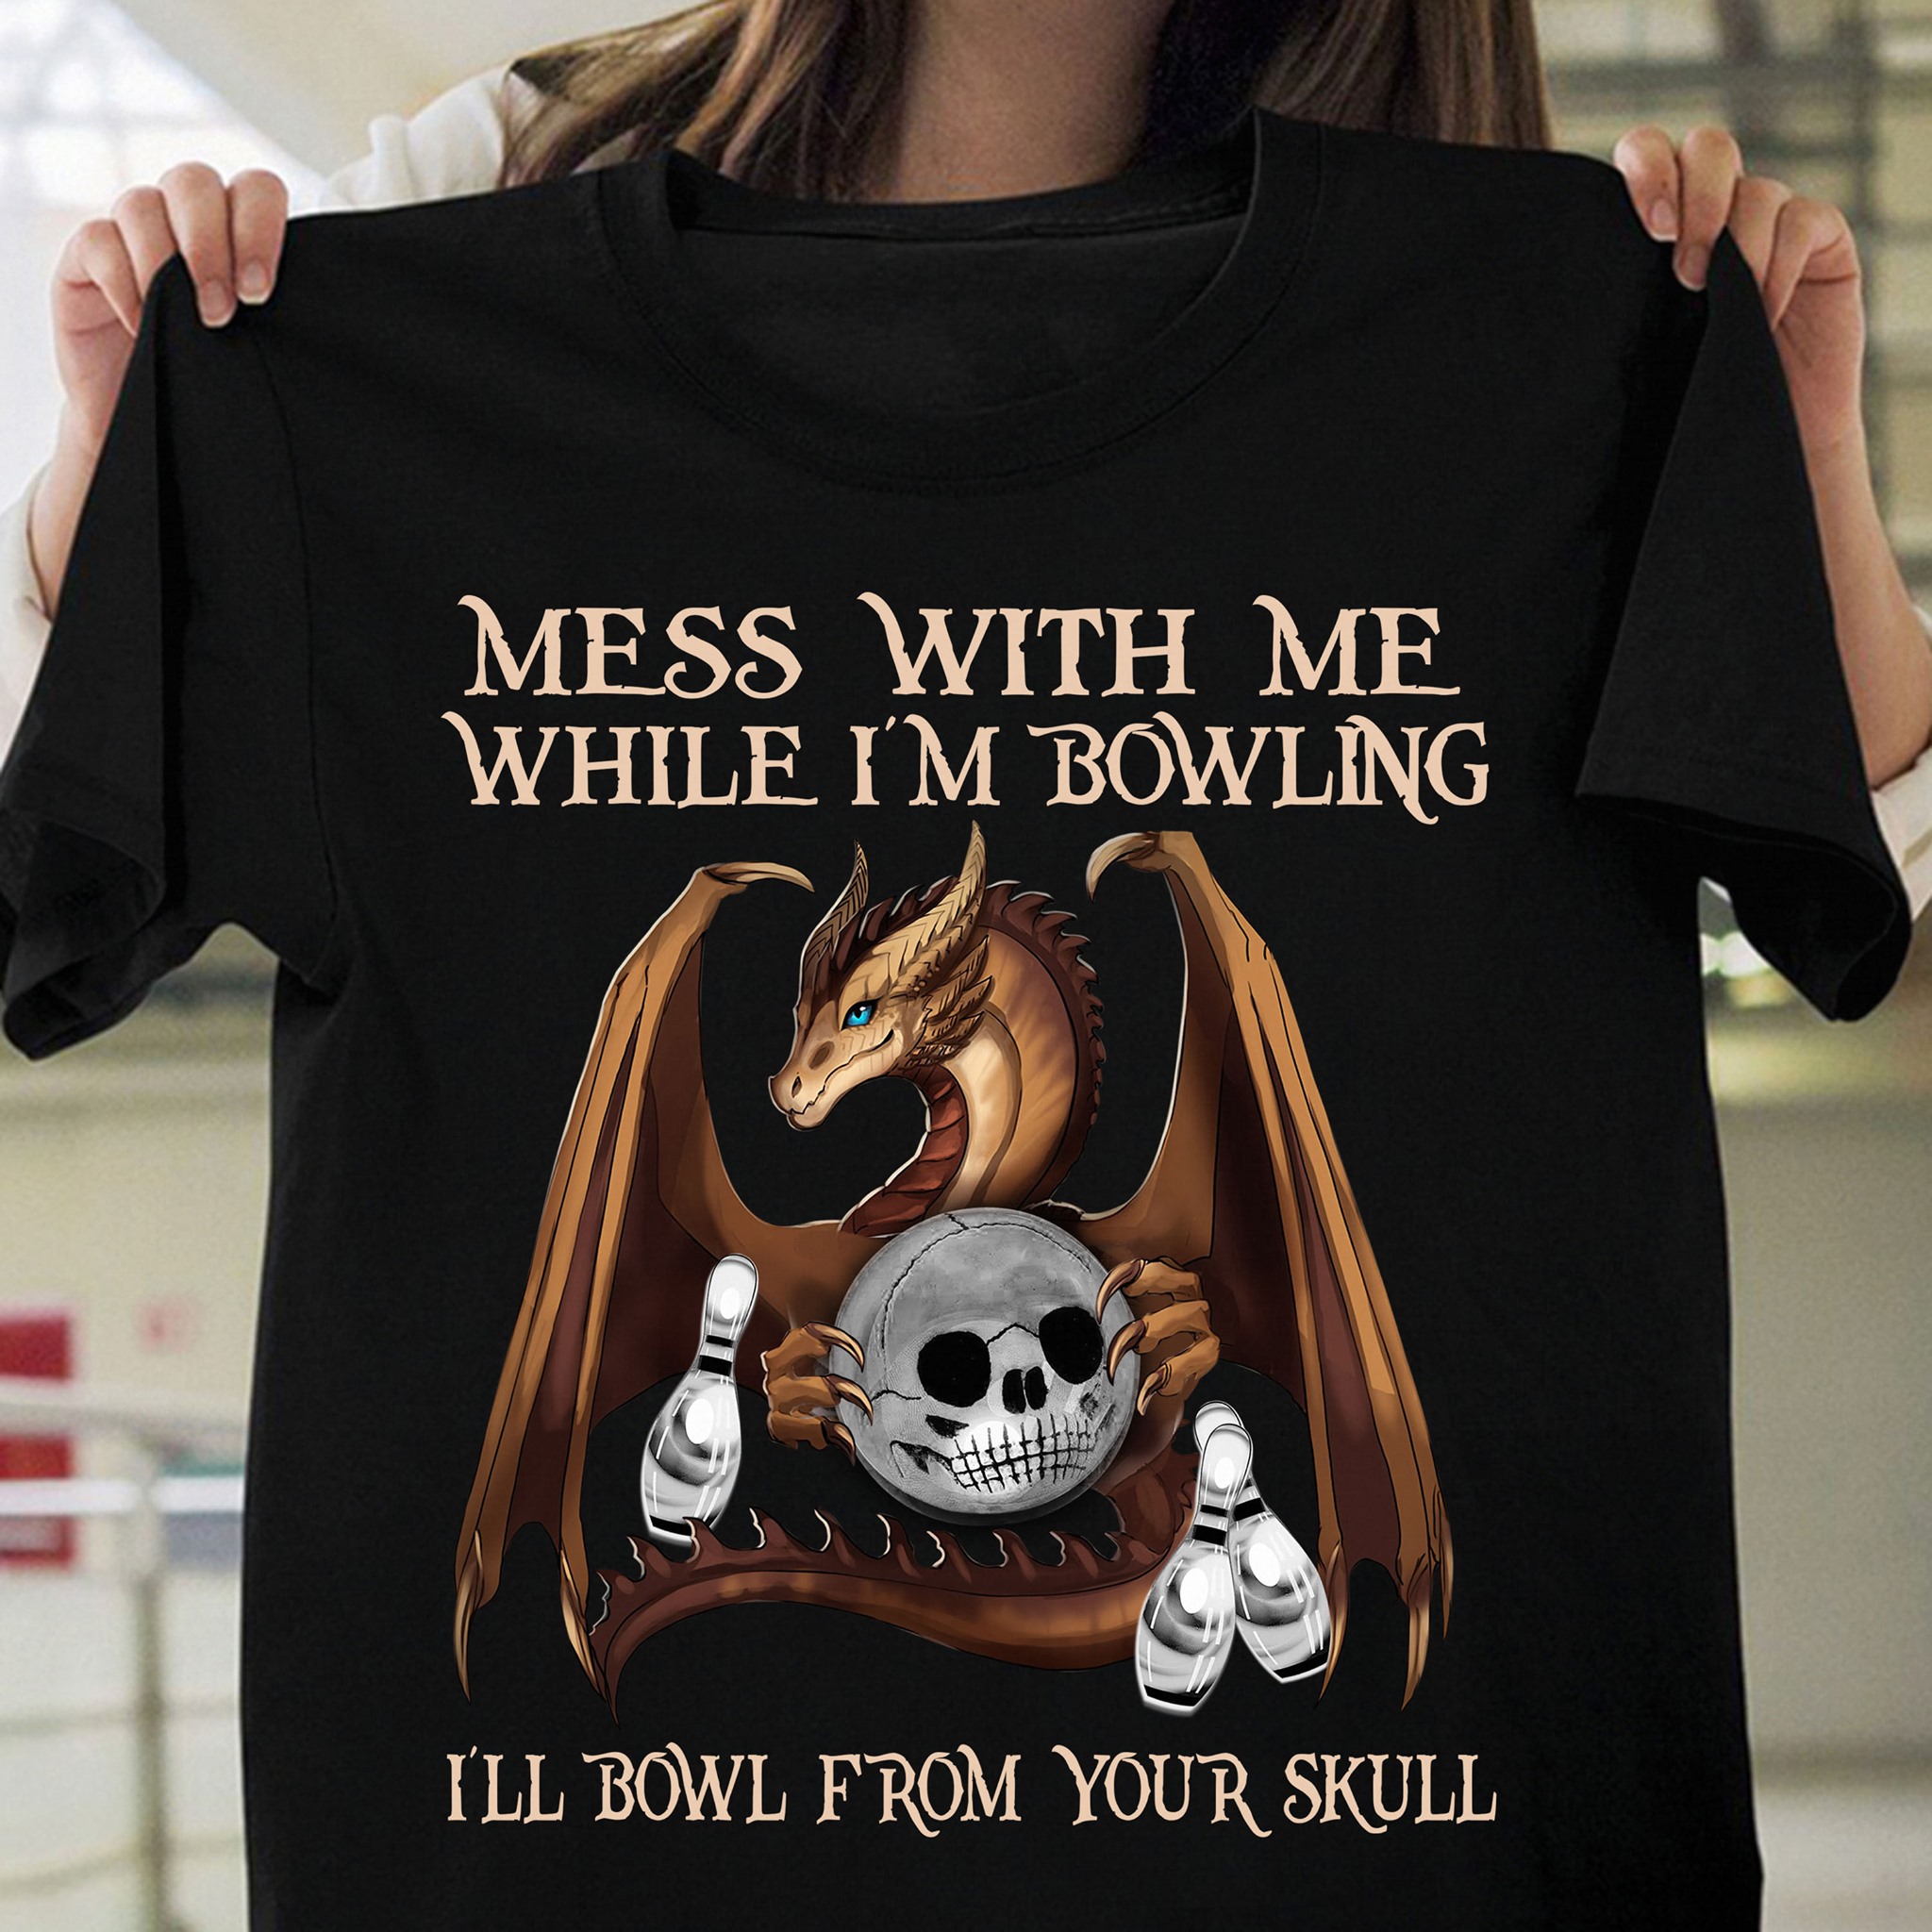 Mess with me while I'm bowling I'll bowl from your skull - Dragon and bowling